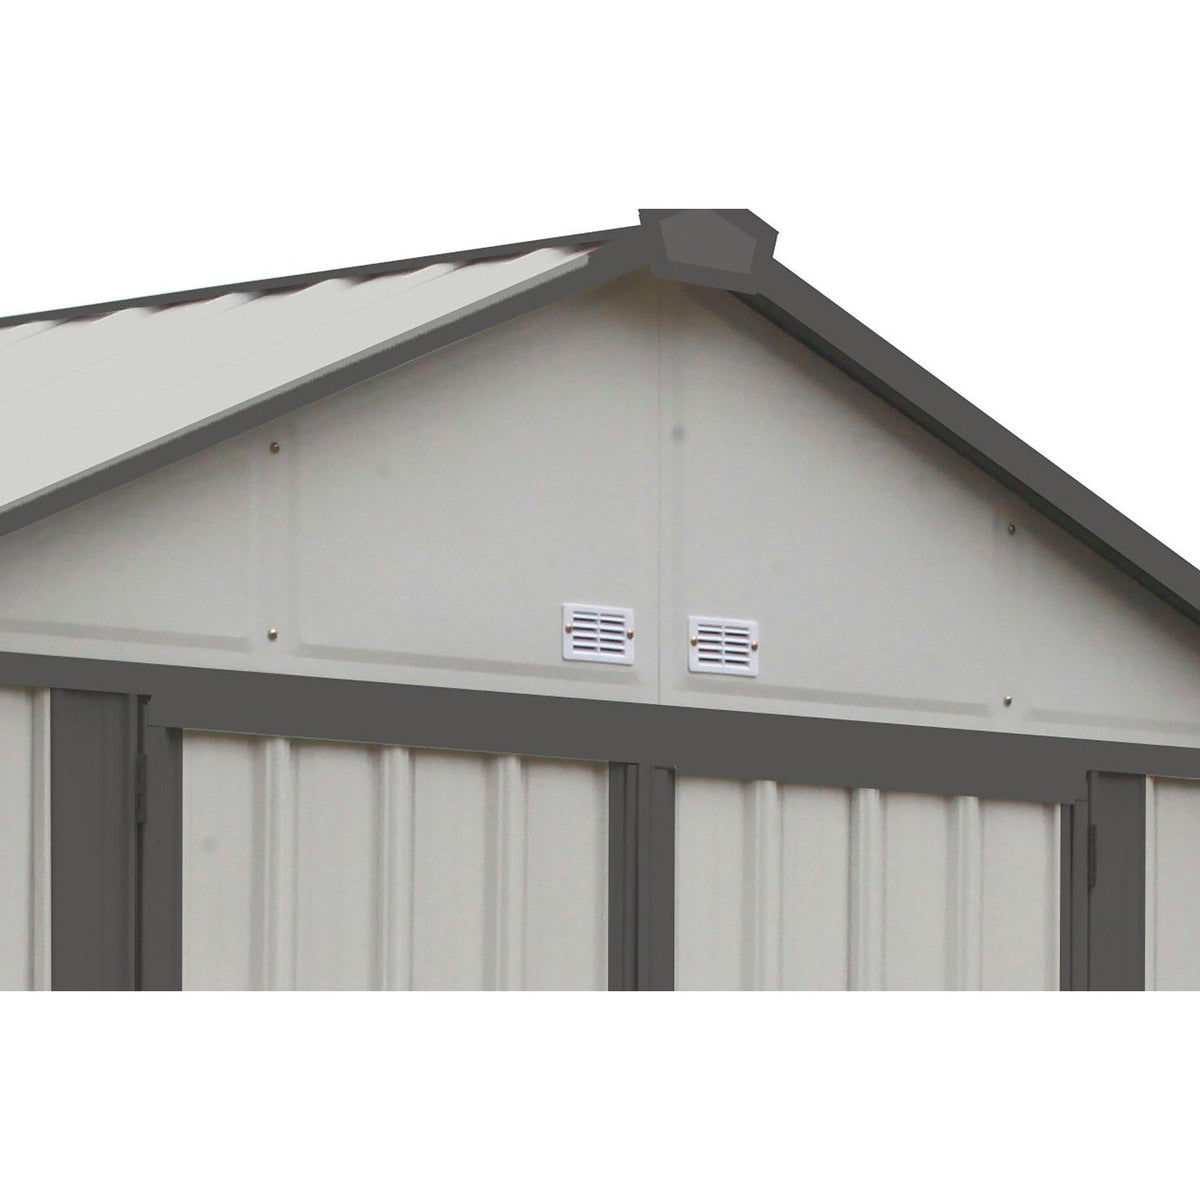 Arrow EZEE Shed High Gable Steel Storage Shed, Cream/Charcoal Trim, 8 x 7 ft.